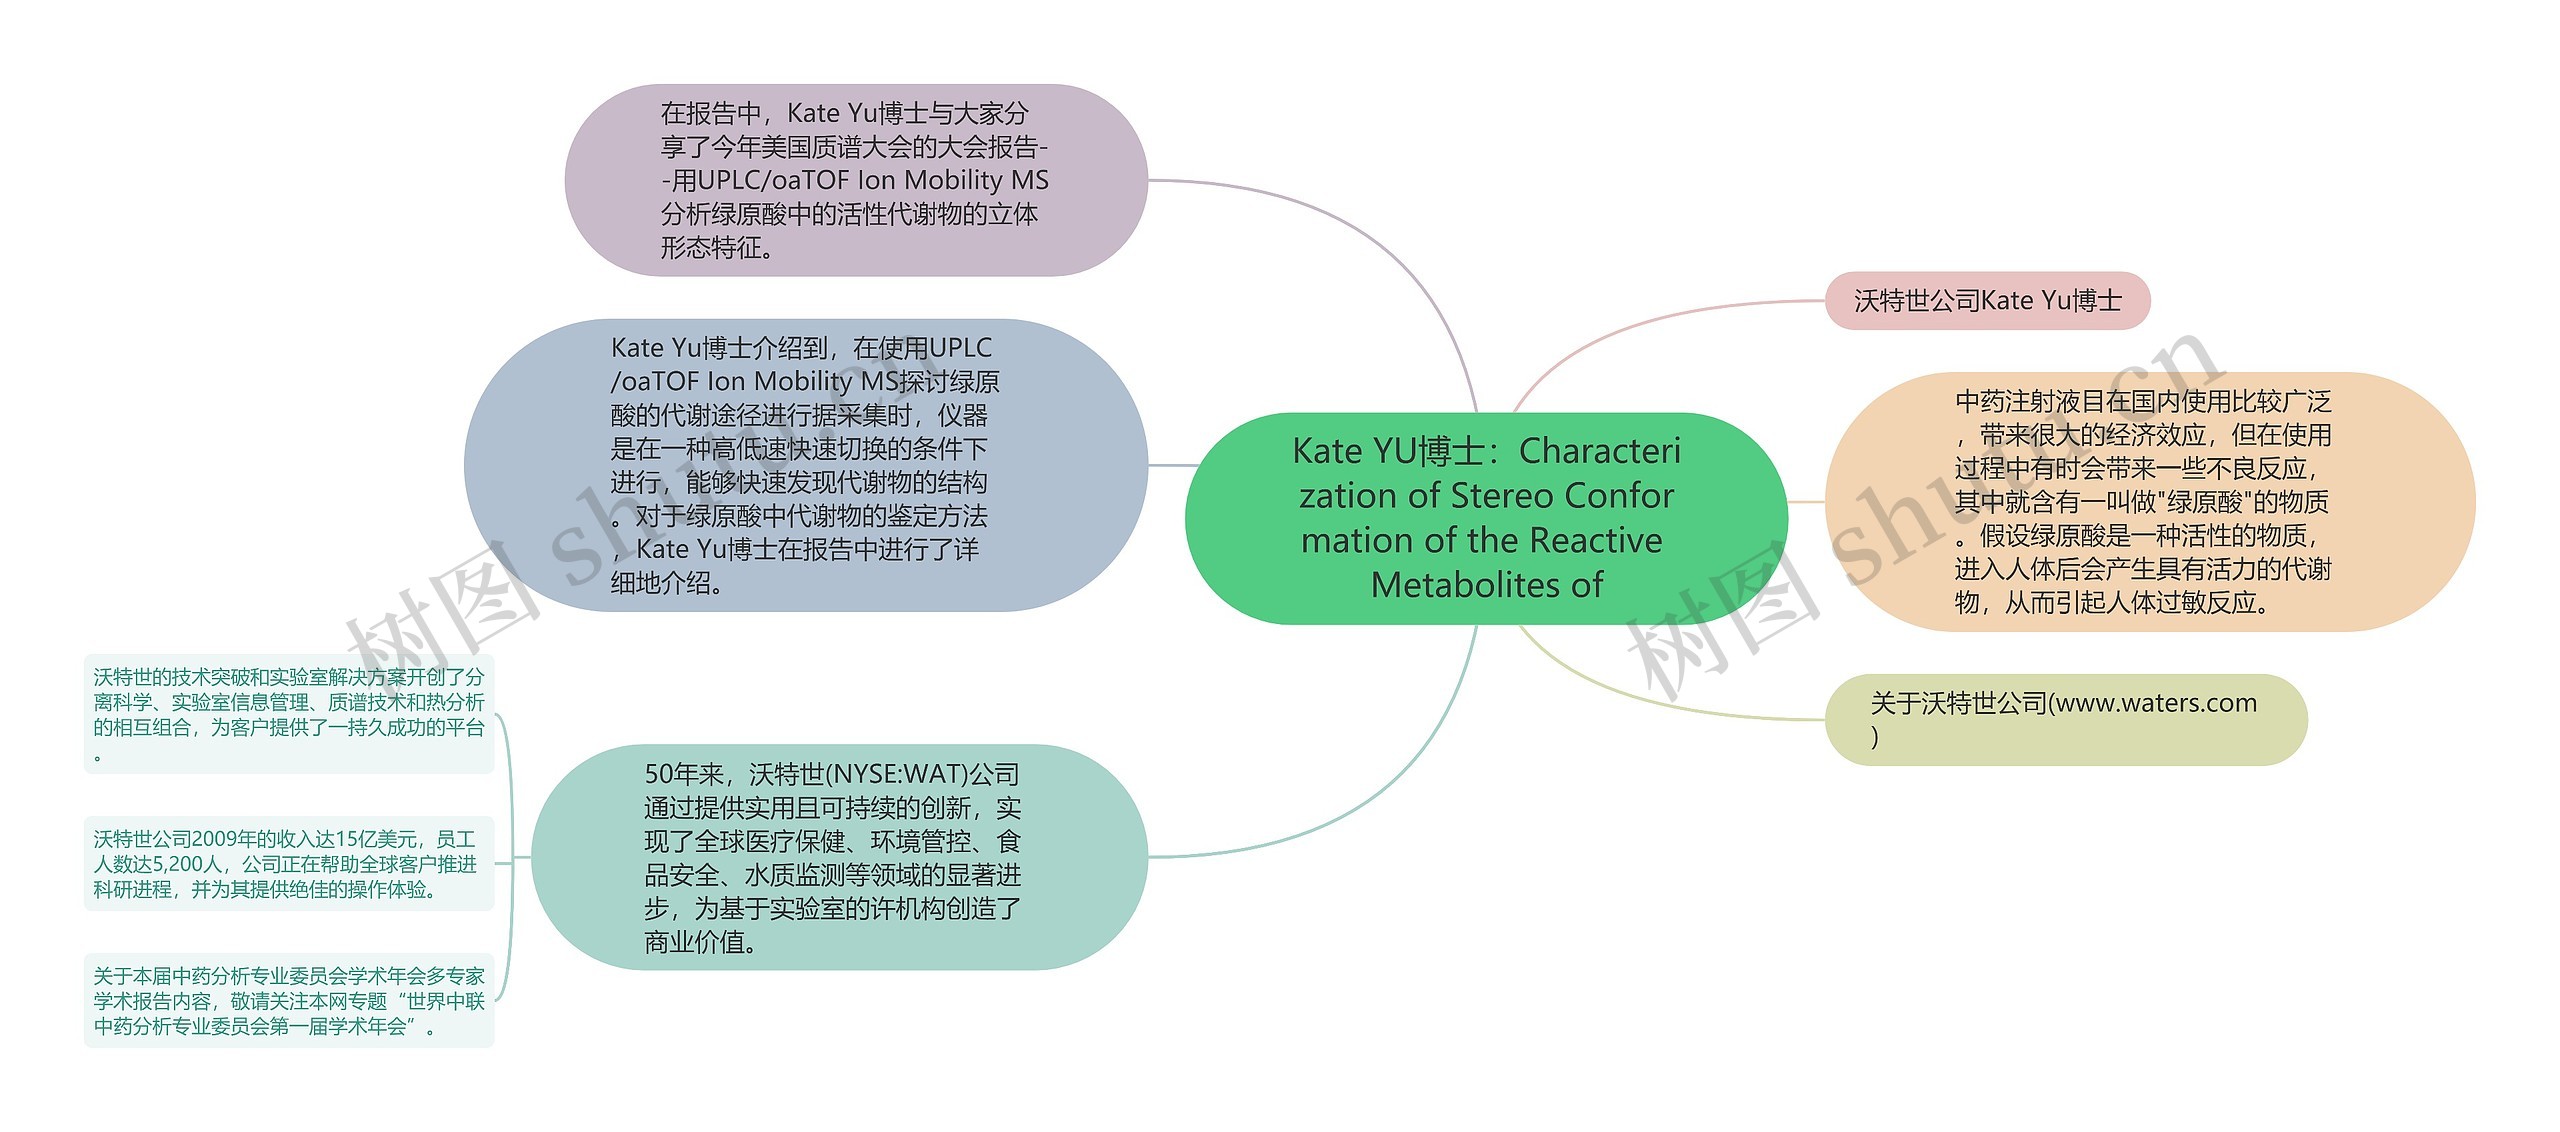 Kate YU博士：Characterization of Stereo Conformation of the Reactive Metabolites of